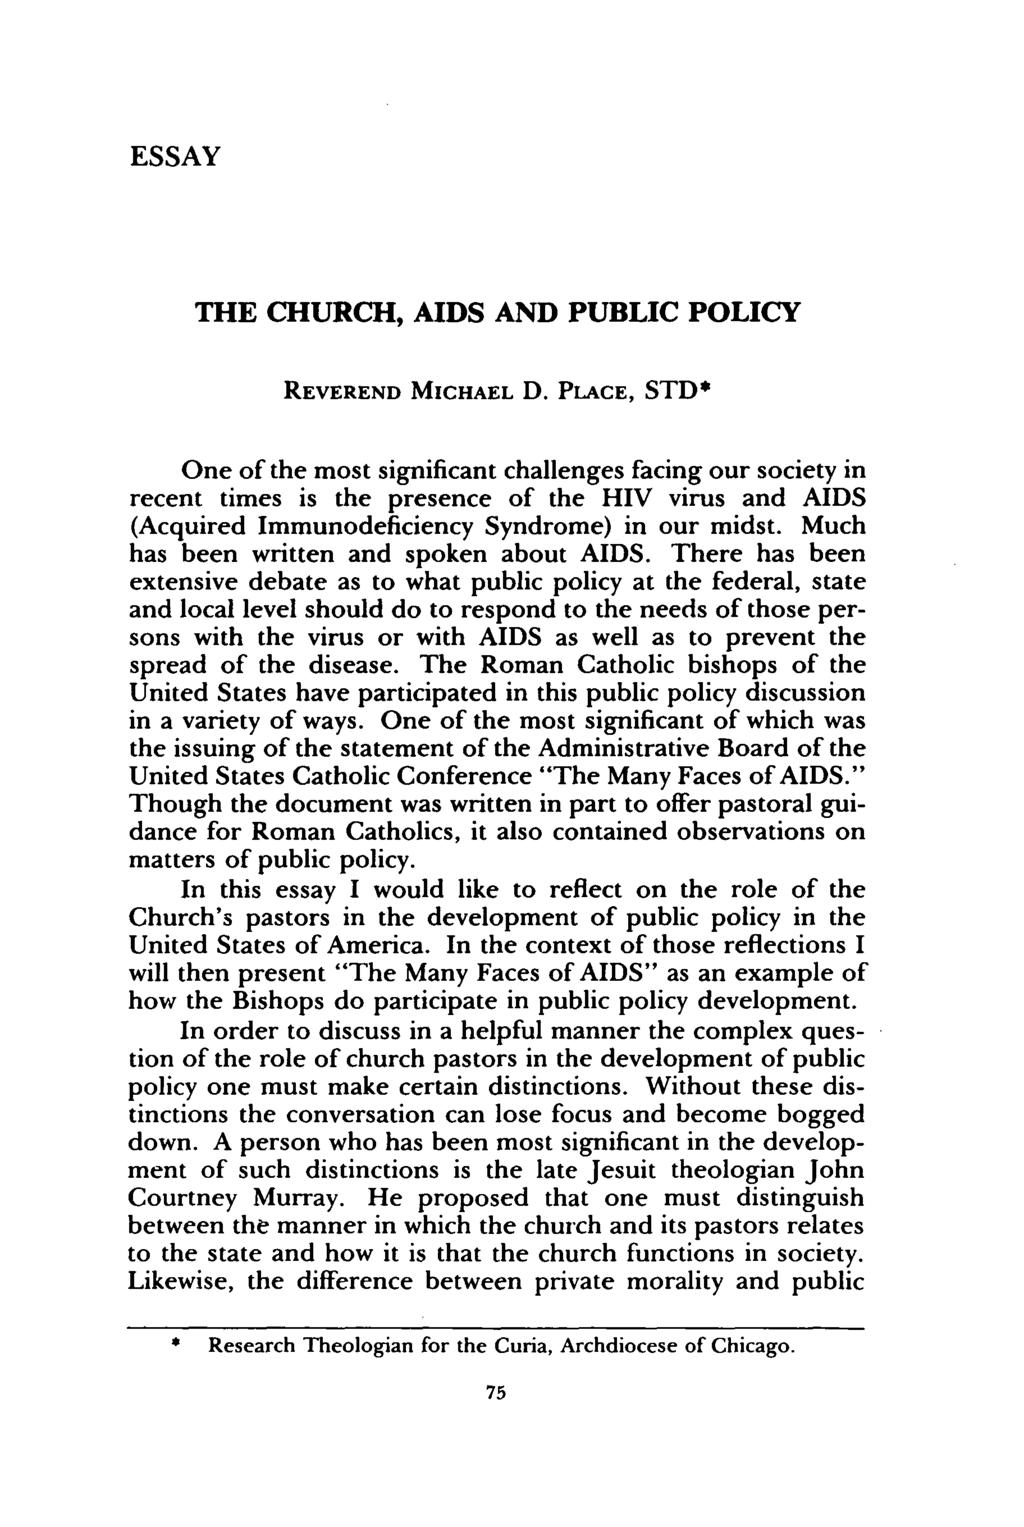 ESSAY THE CHURCH, AIDS AND PUBLIC POLICY REVEREND MICHAEL D.